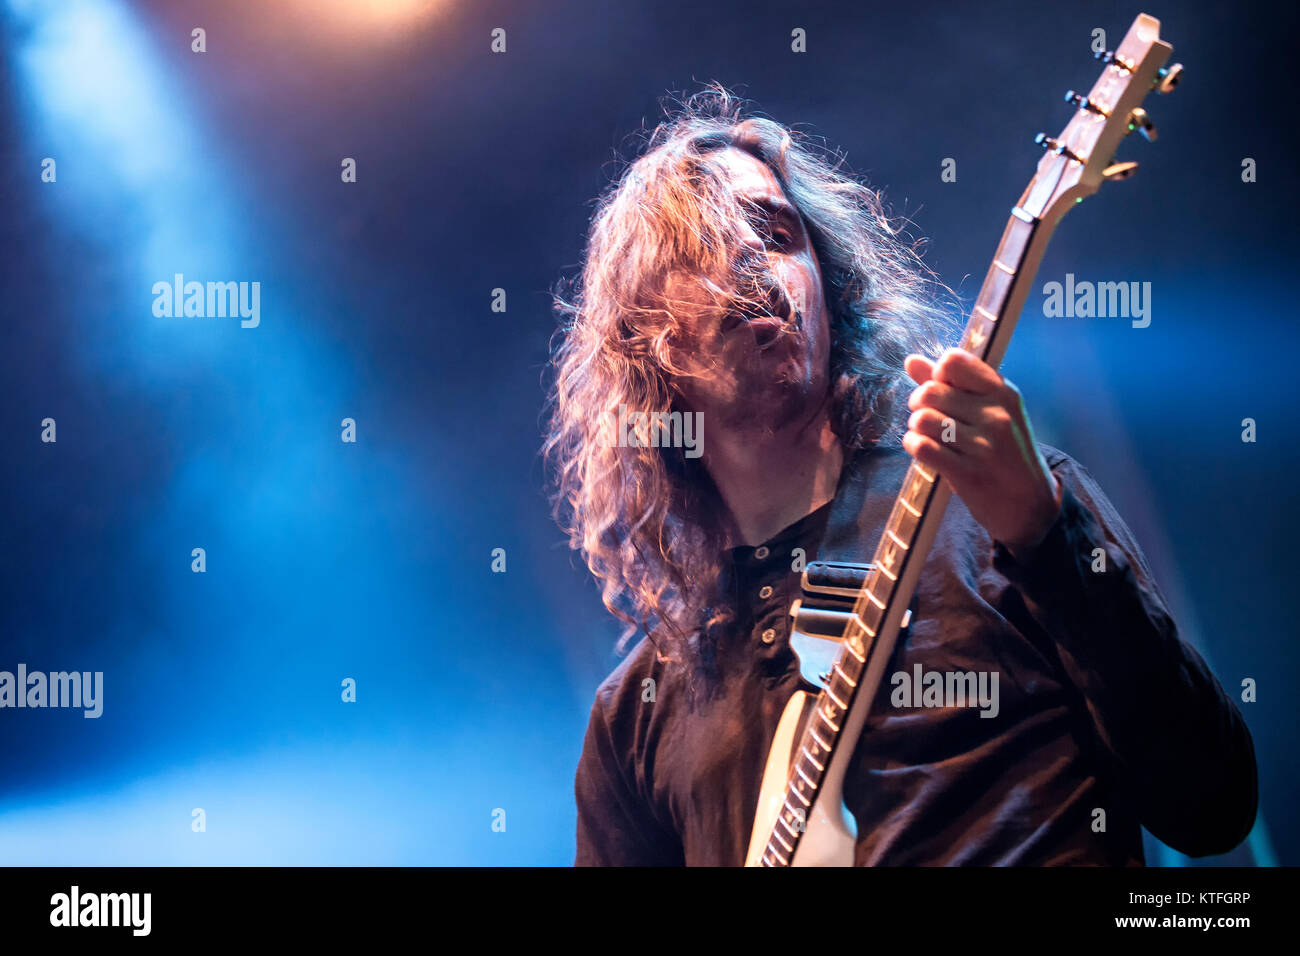 The progressive Swedish death metal band Opeth performs a live concert at the Norwegian music festival Tons of Rock 2015. Here vocalist and guitarist Mikael Åkerfeldt is seen live on stage. Norway, 18/06 2015. Stock Photo